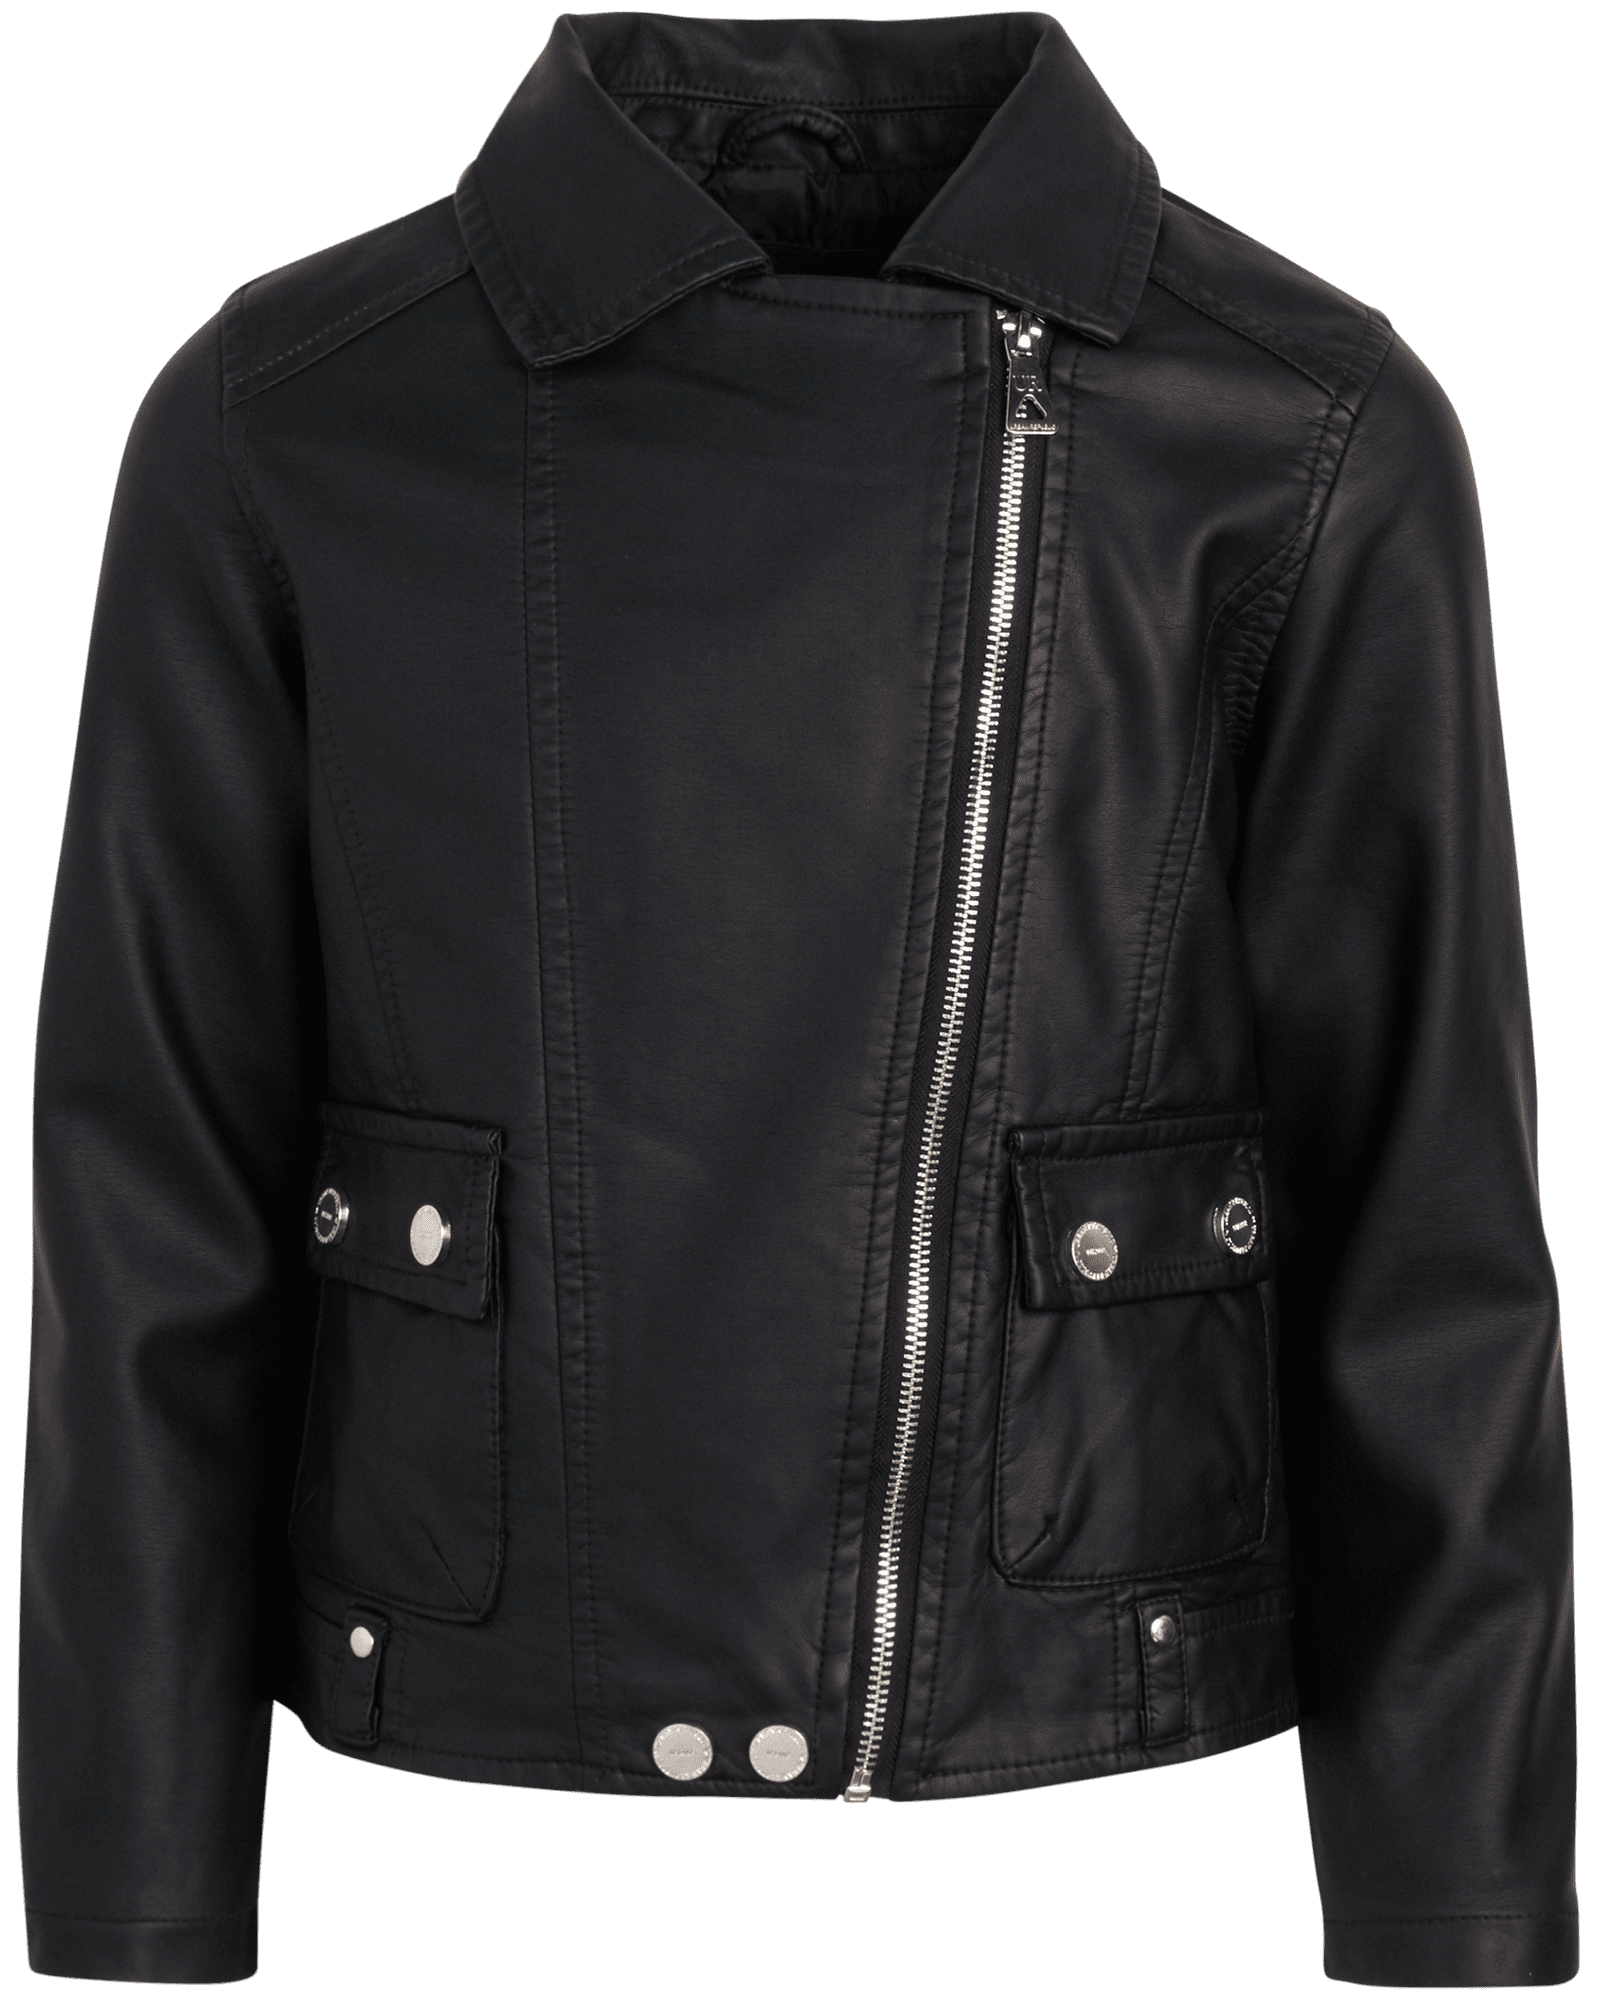 NEW GIRLS BLACK BACK TO SCHOOL JACKET COAT AGES 2 TO 13 